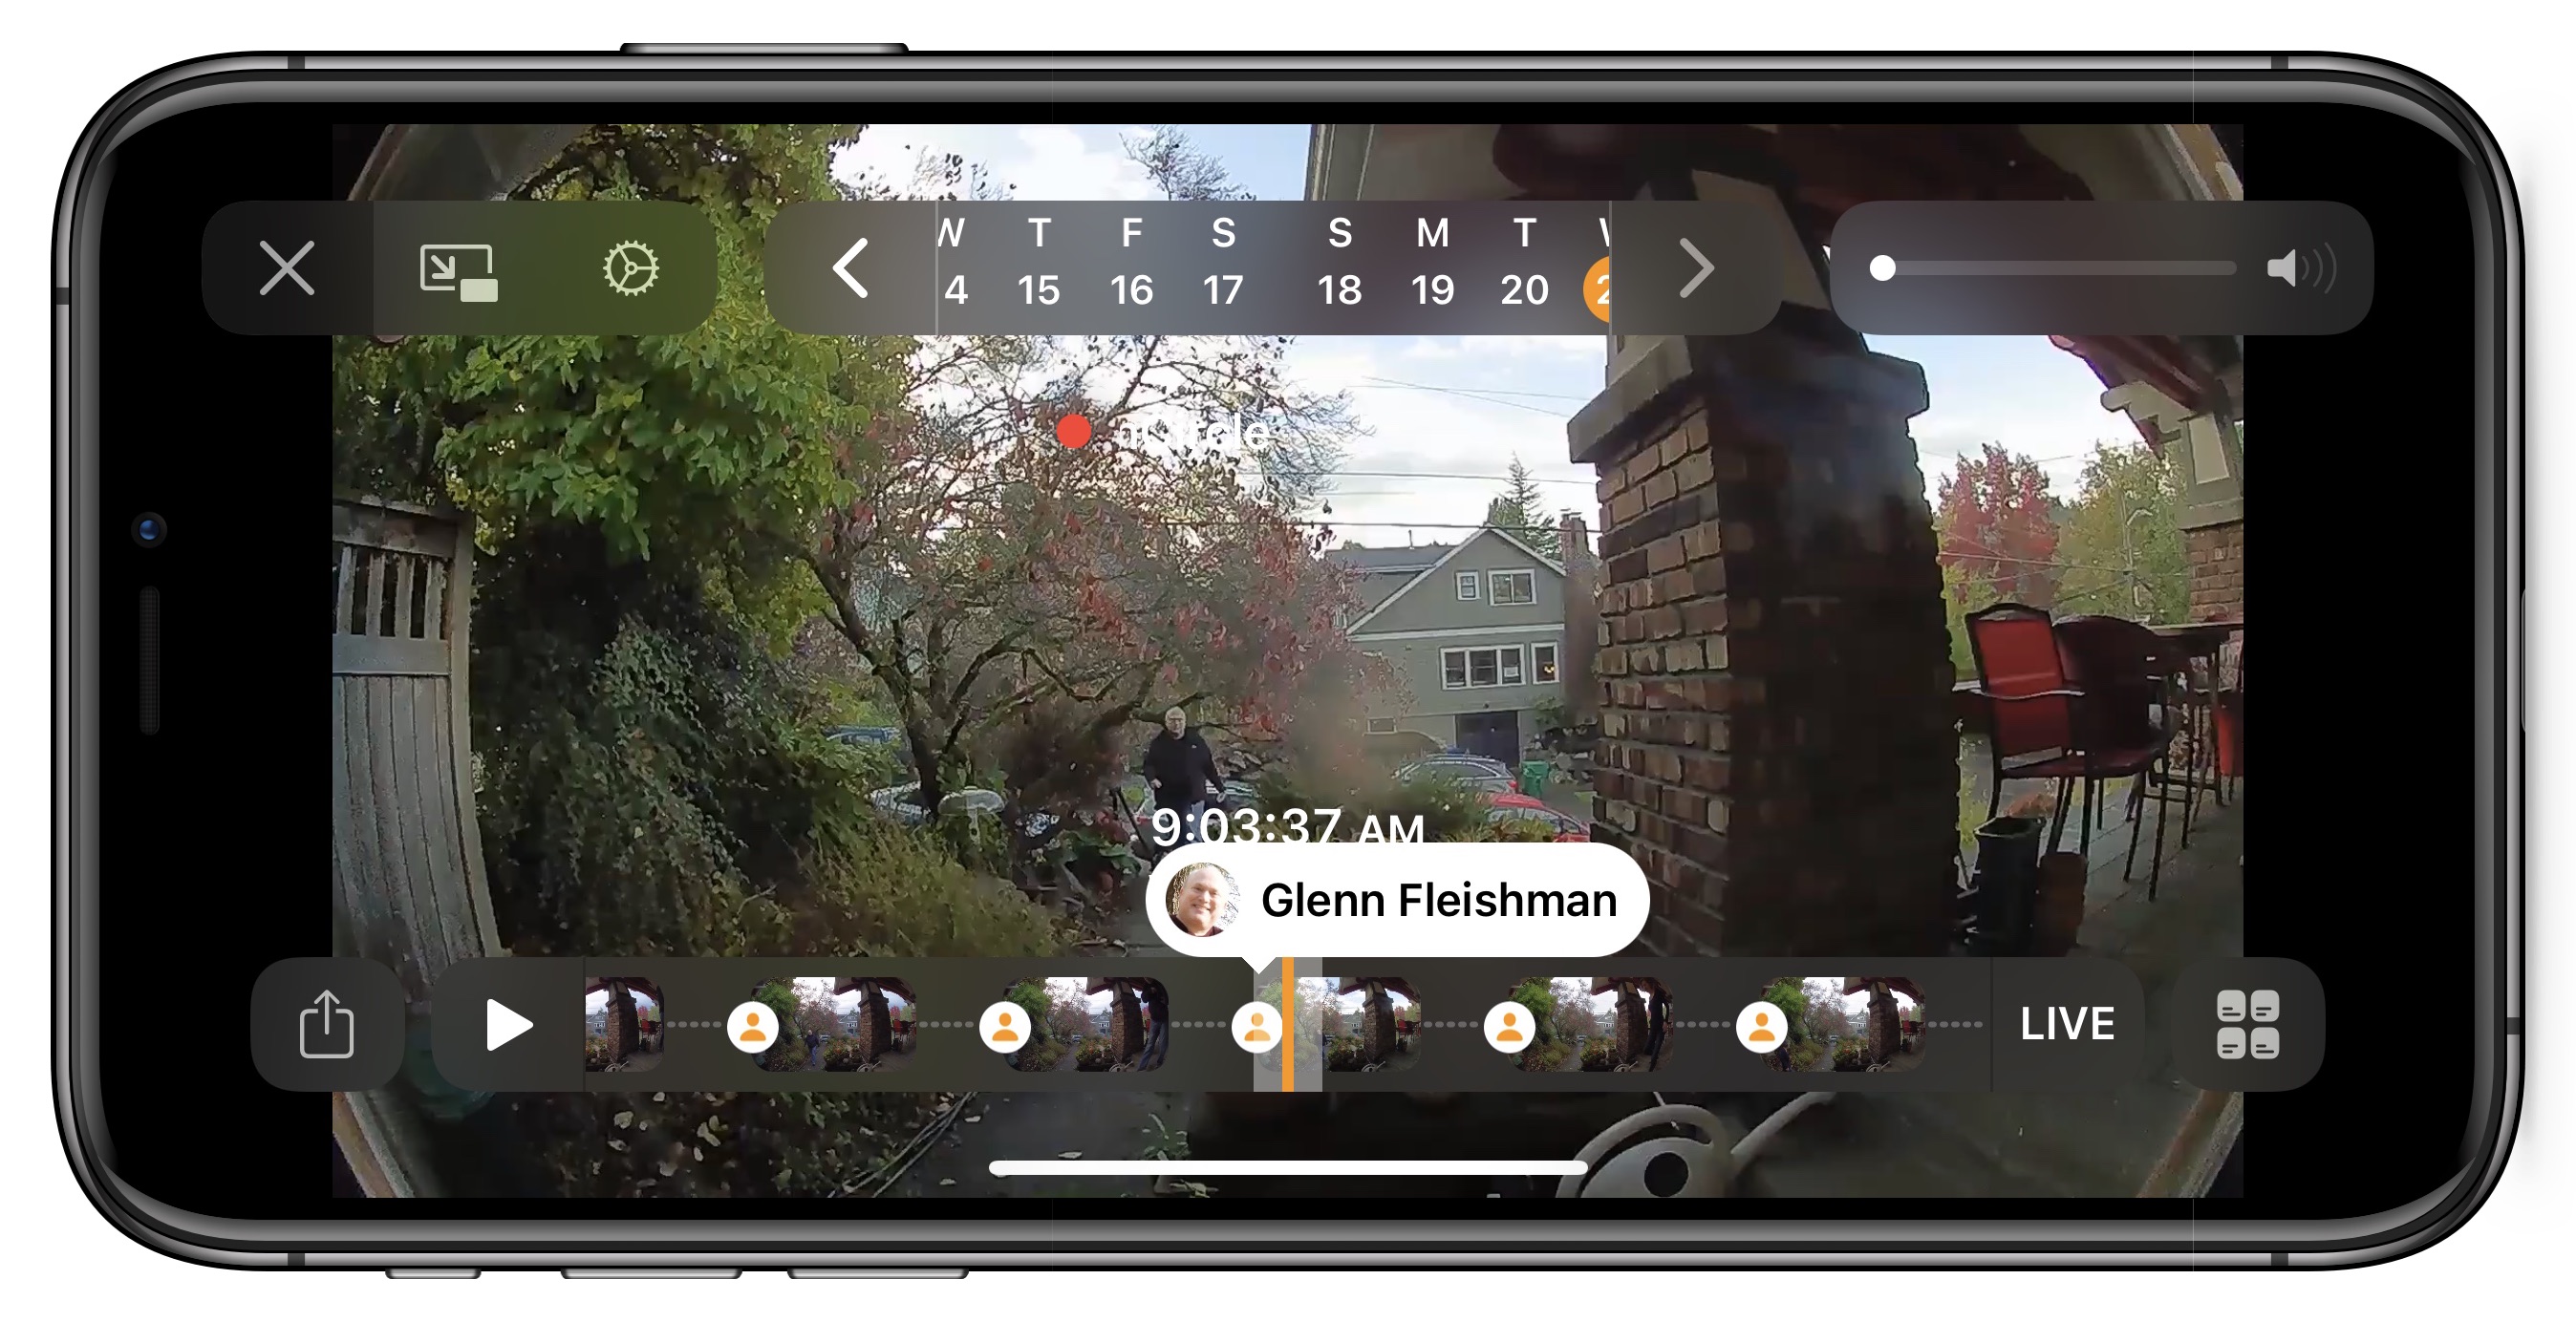 Apple's HomeKit Secure Video Leverages iCloud Storage and Preserves Privacy  - TidBITS